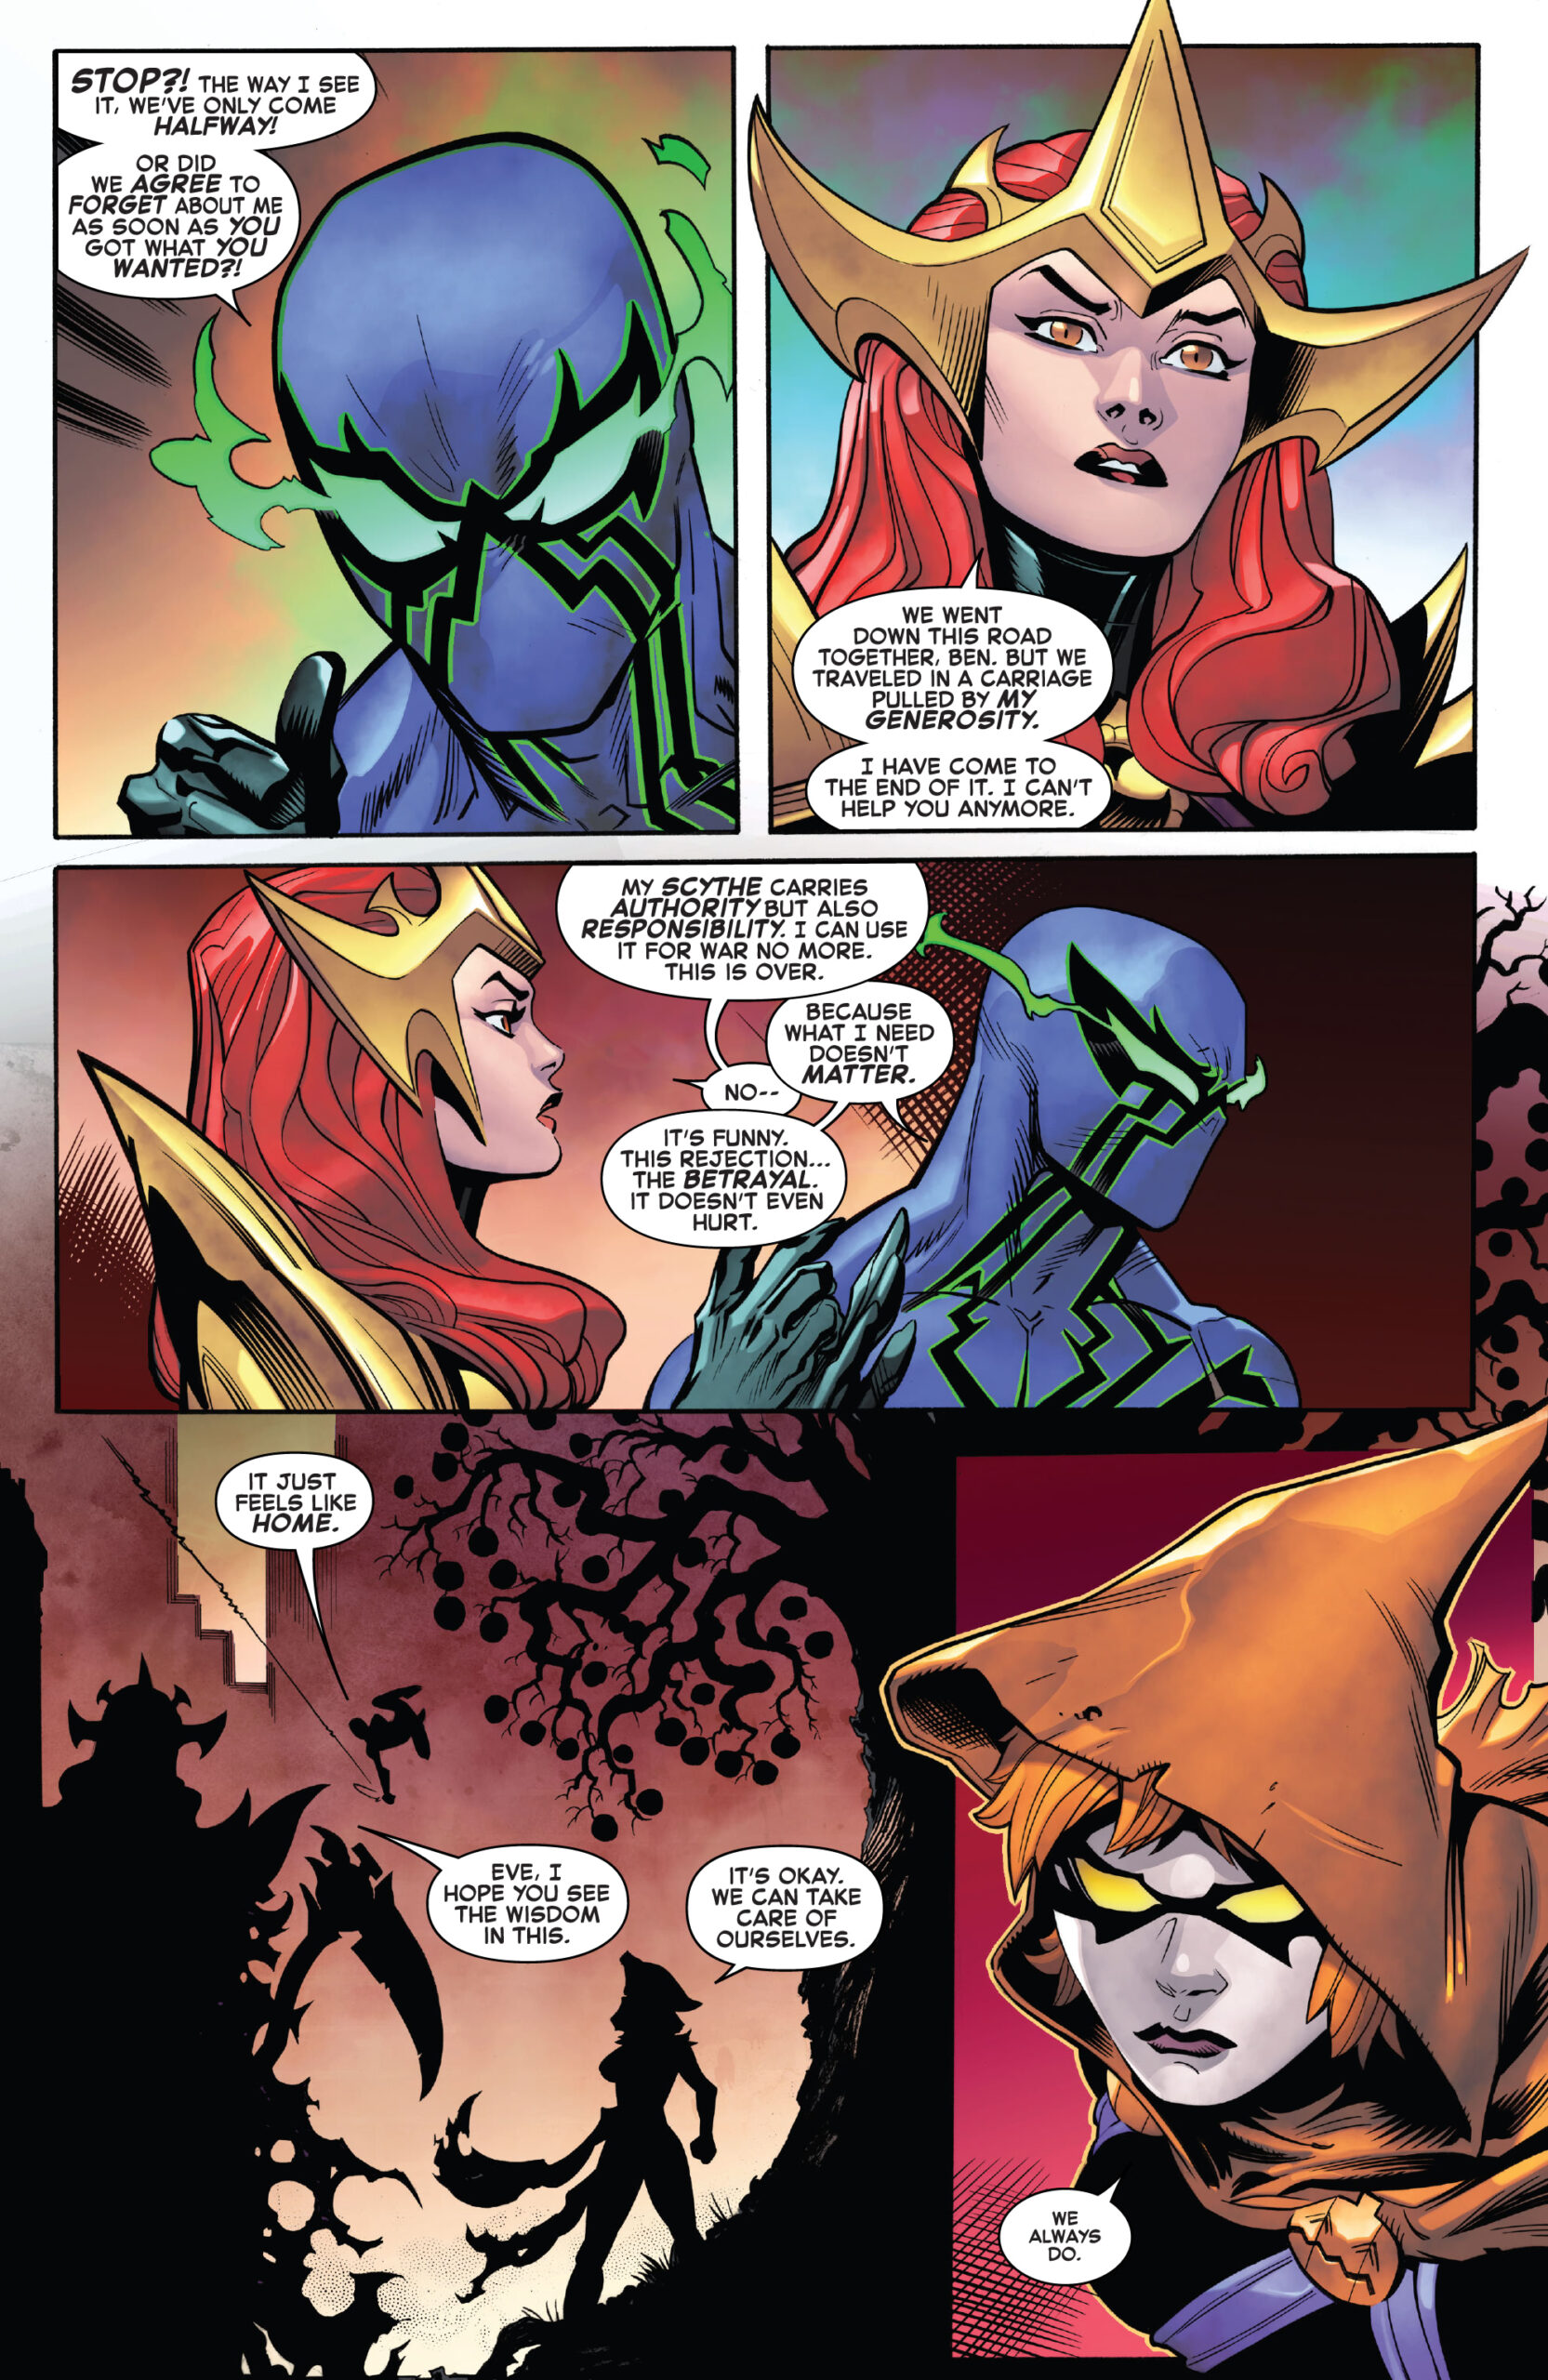 Amazing Spider-Man #18 spoilers 3 Goblin Queen Chasm Hallows' Eve